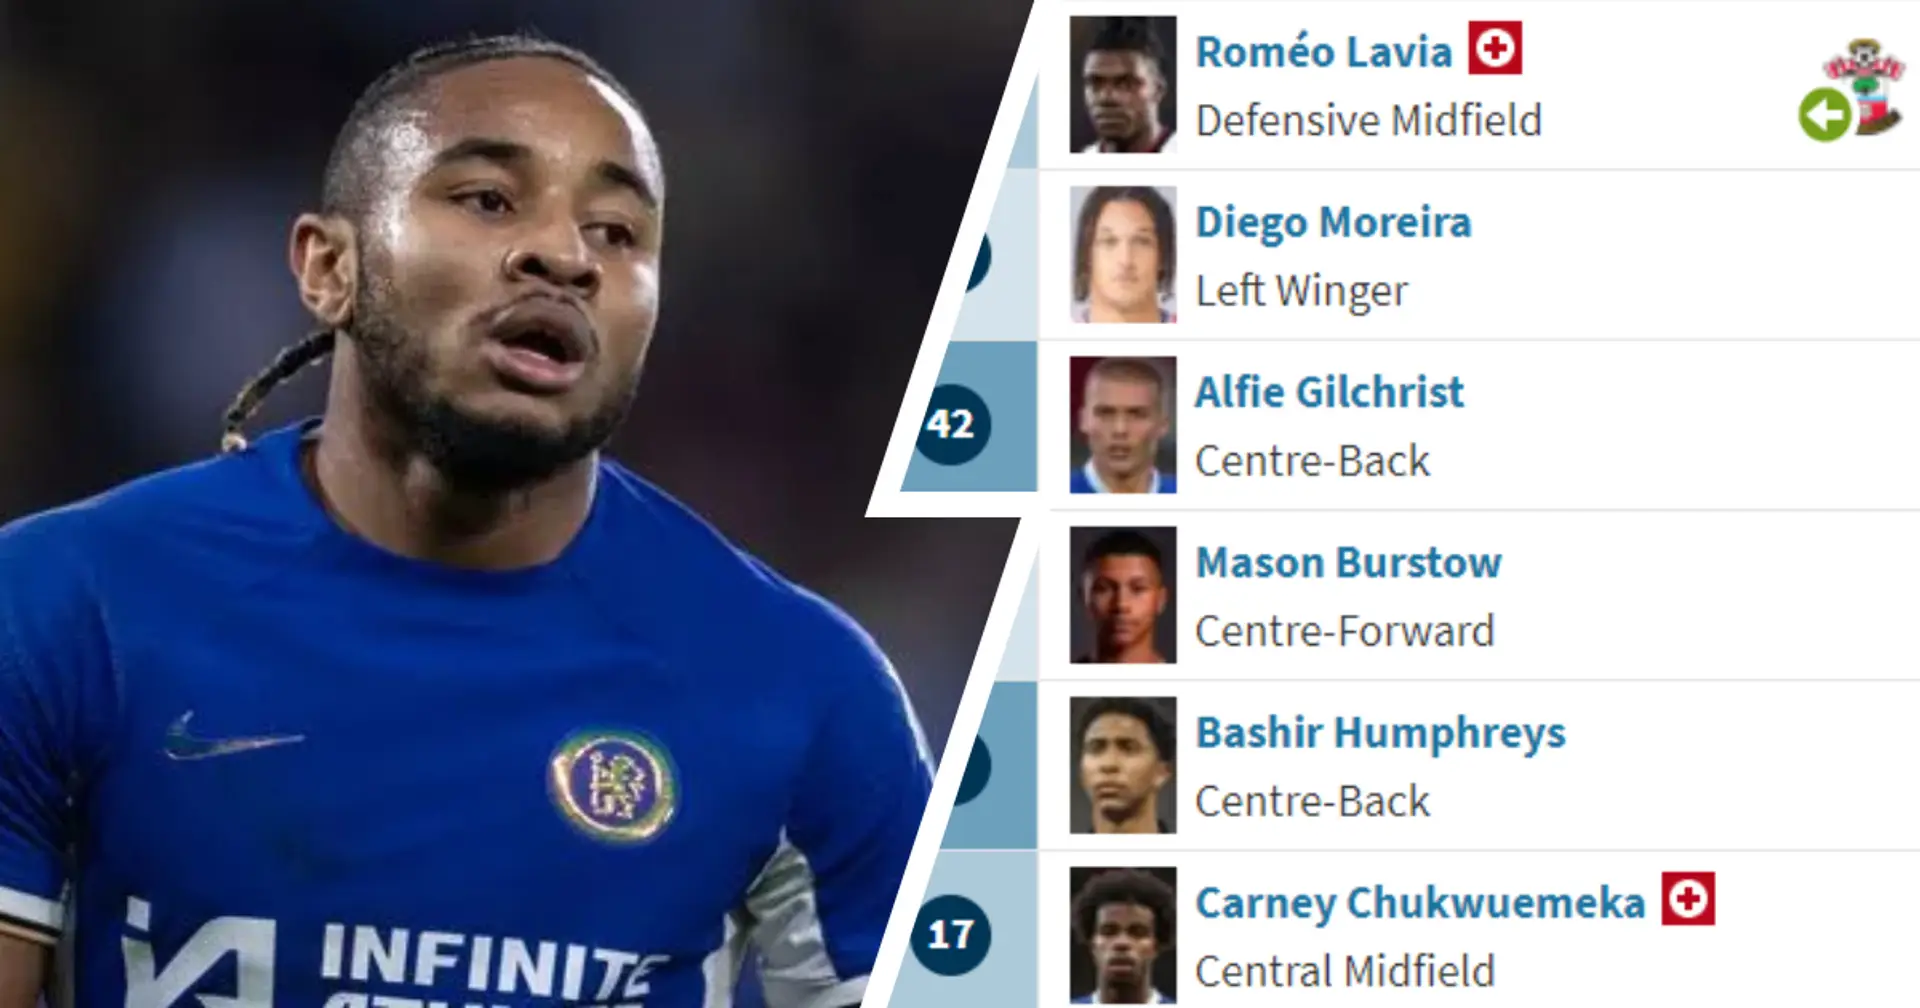 Not a good look for Lavia and Nkunku: Chelsea players with least minutes played so far this season